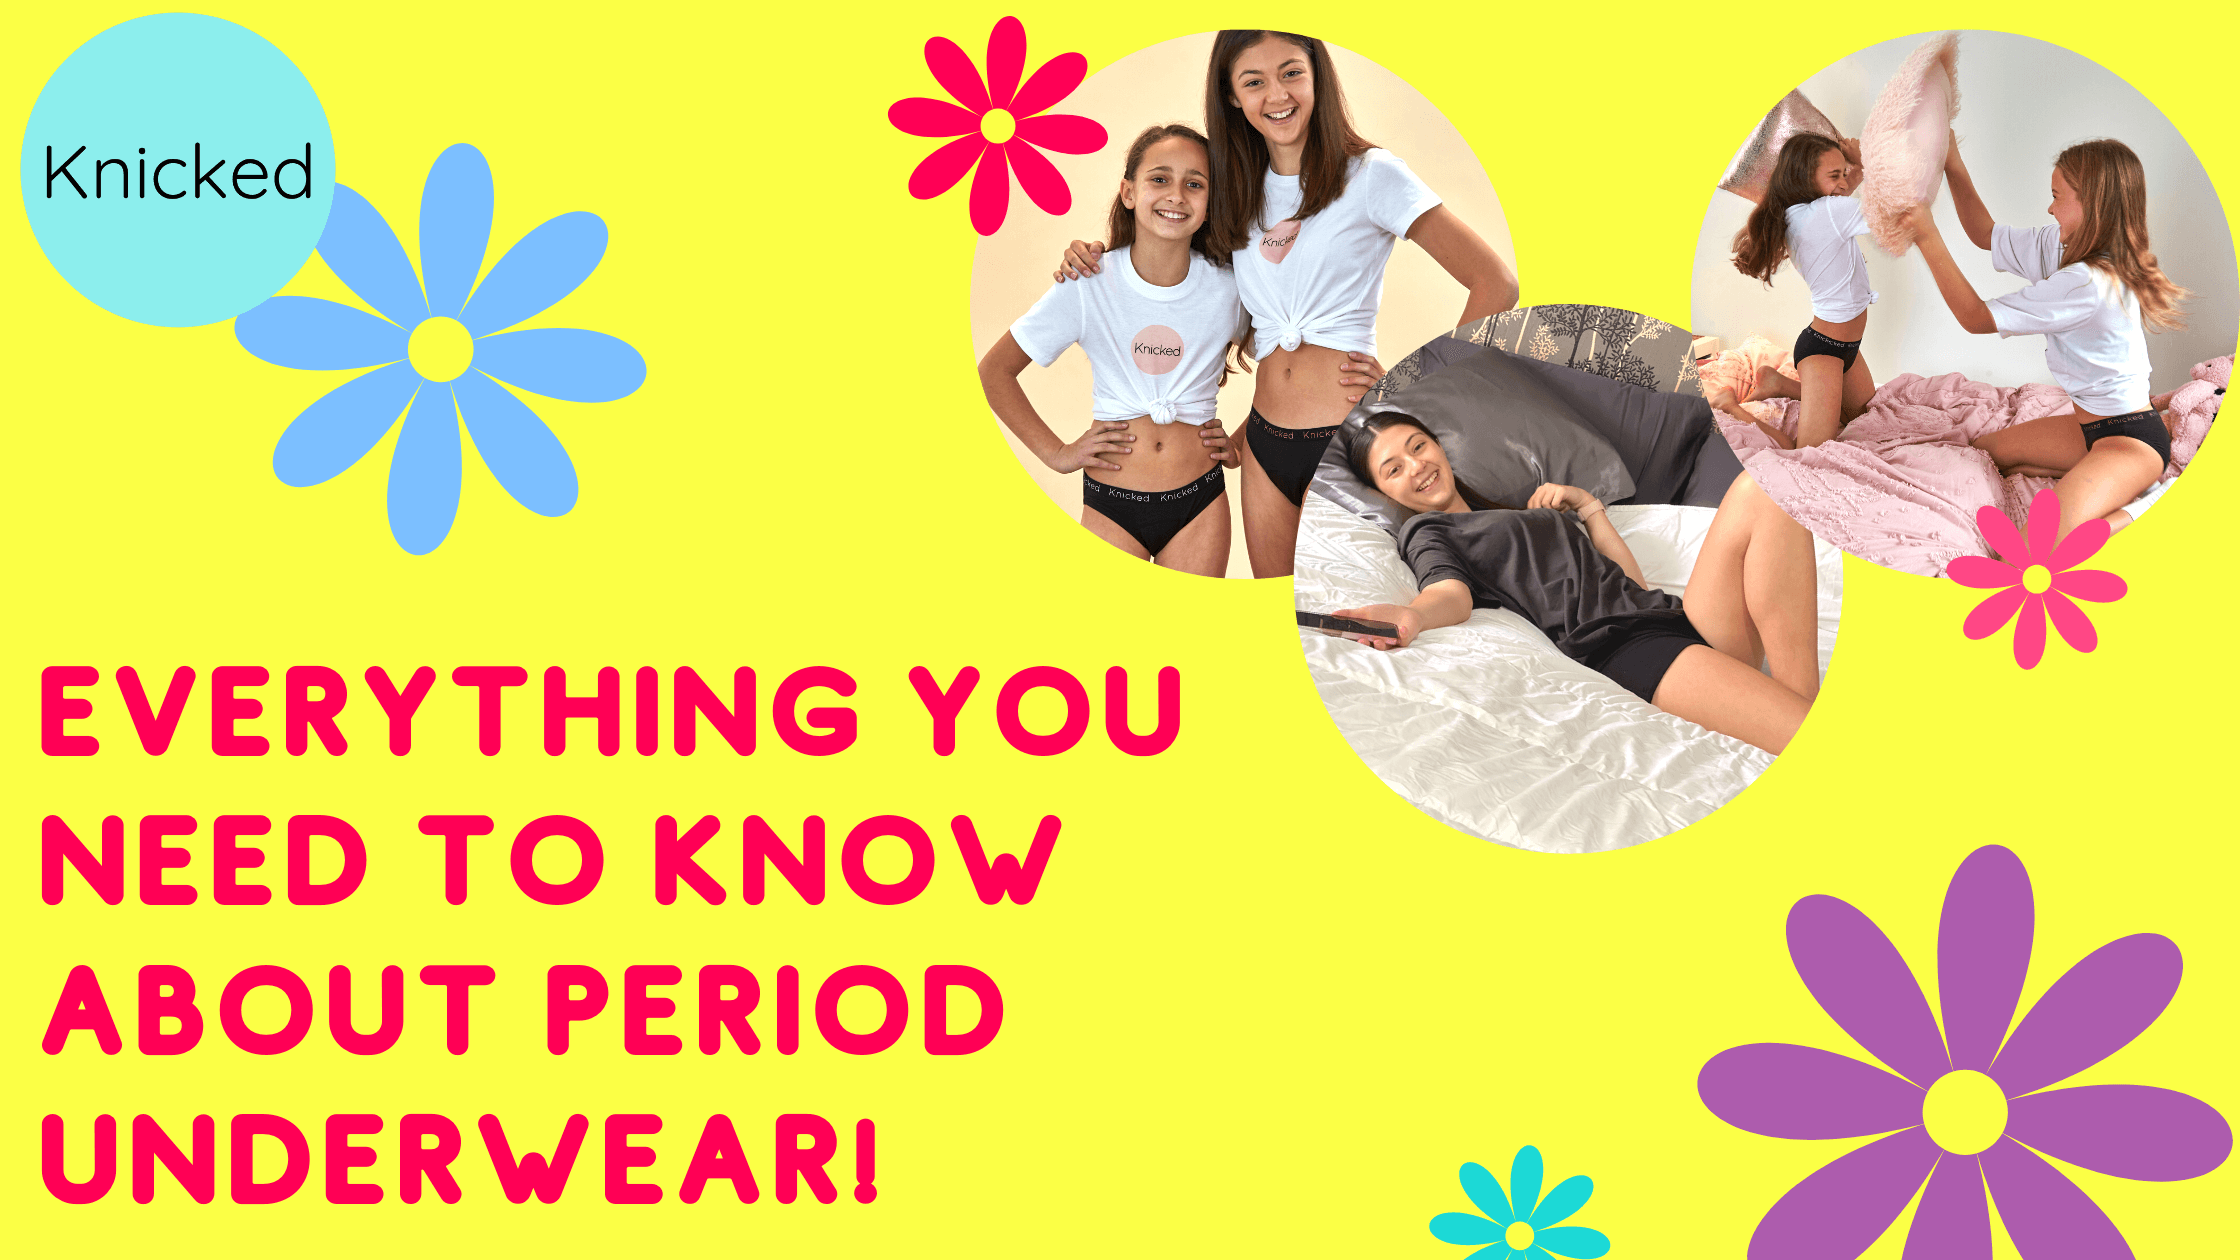 Share the Dignity - Let's talk period undies! Period undies are a great  invention that allows you to go about your day wearing only undies, no pads  or tampons necessary! Period undies